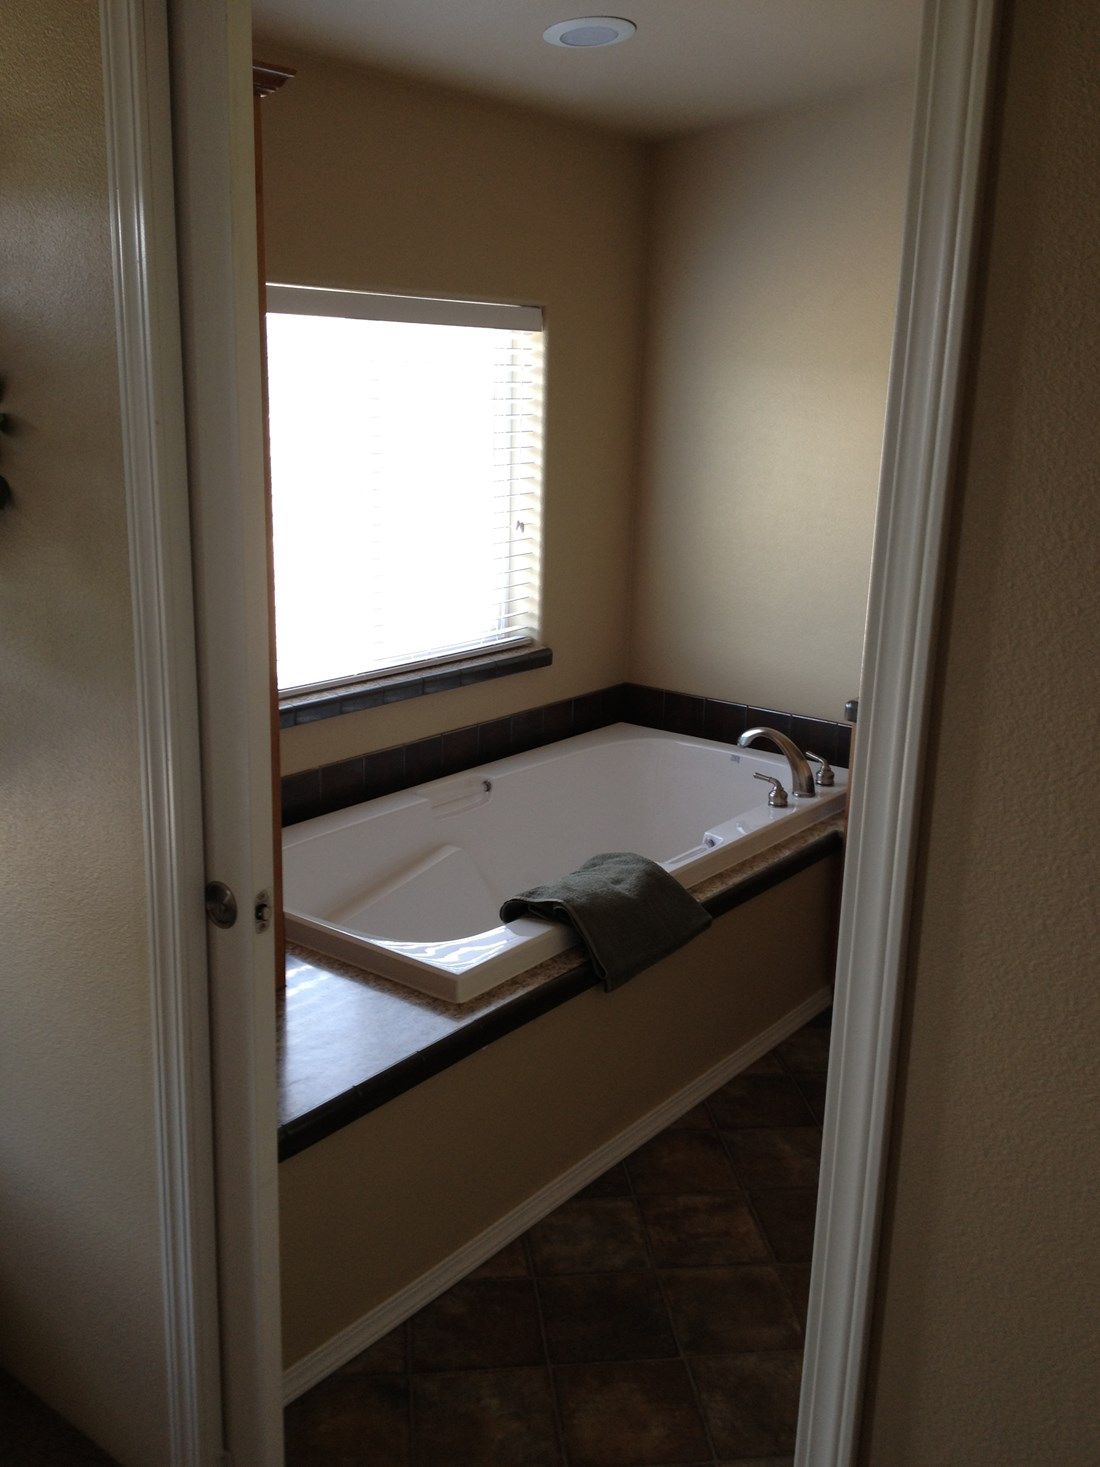 The 2848 MARLETTE SPECIAL Master Bathroom. This Manufactured Mobile Home features 3 bedrooms and 2 baths.